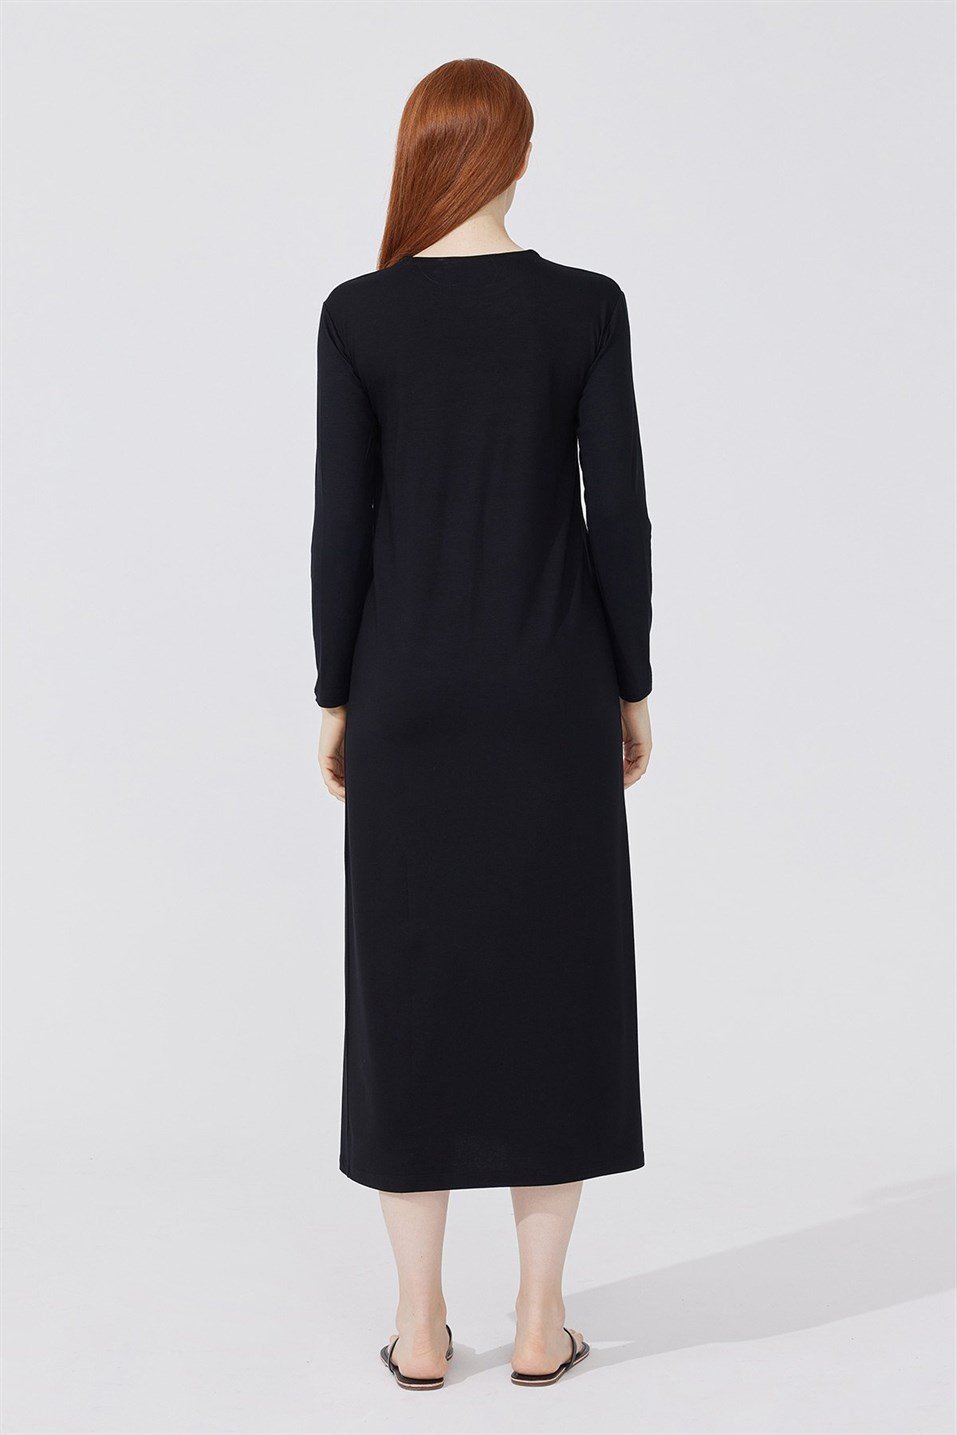 Black Long Sleeve Combed Cotton Dress